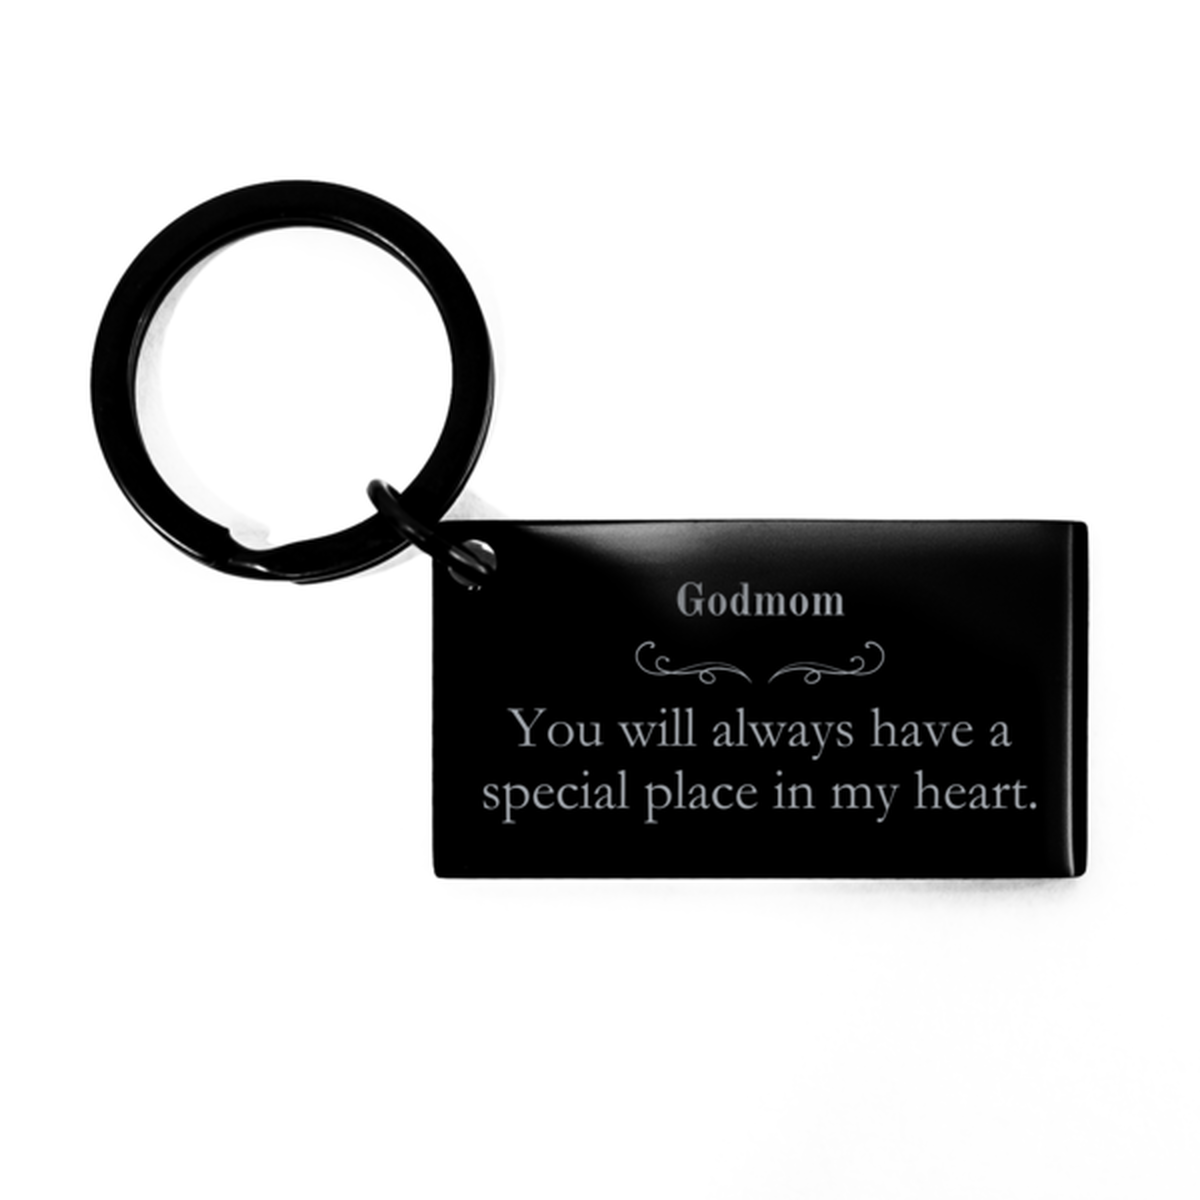 Godmom Keychain Inspirational - You will always have a special place in my heart - Perfect Gift for Birthday, Christmas, Holidays - Unique Engraved Keychain for Godmom